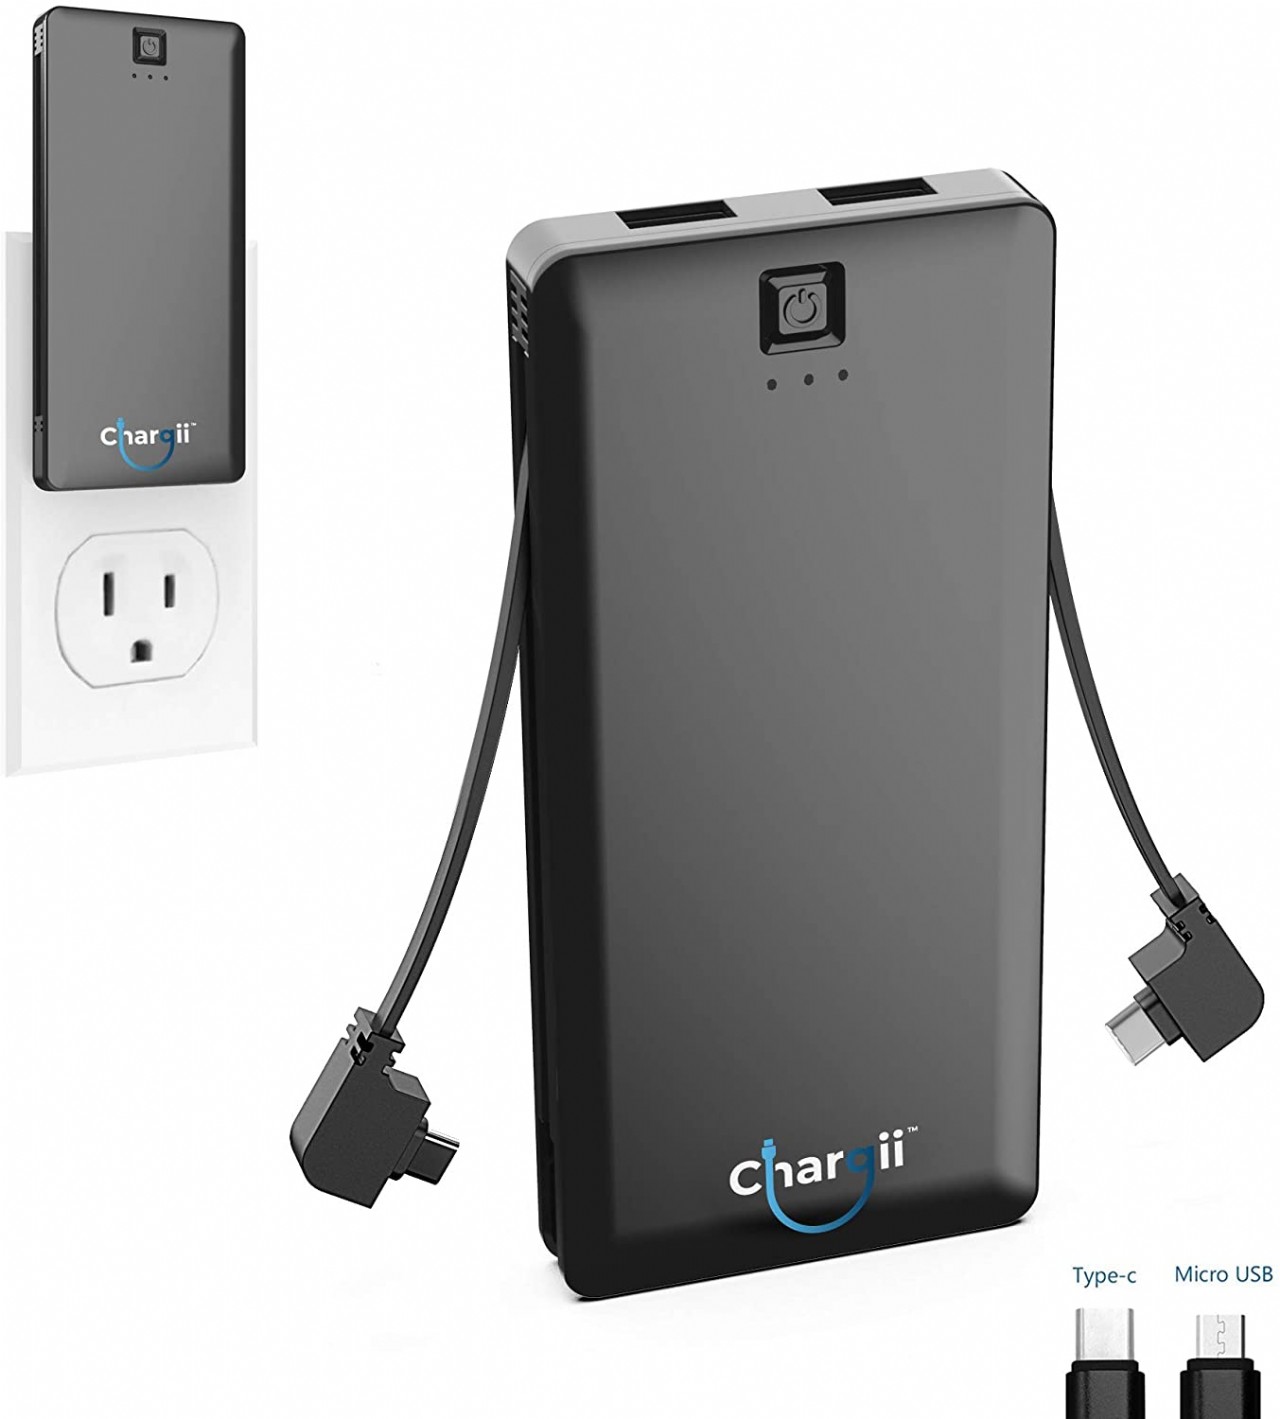 Power Bank - All-in-One Portable Charger - Cell Phone Battery Backup - Built-in Wall Plug AC Adapter